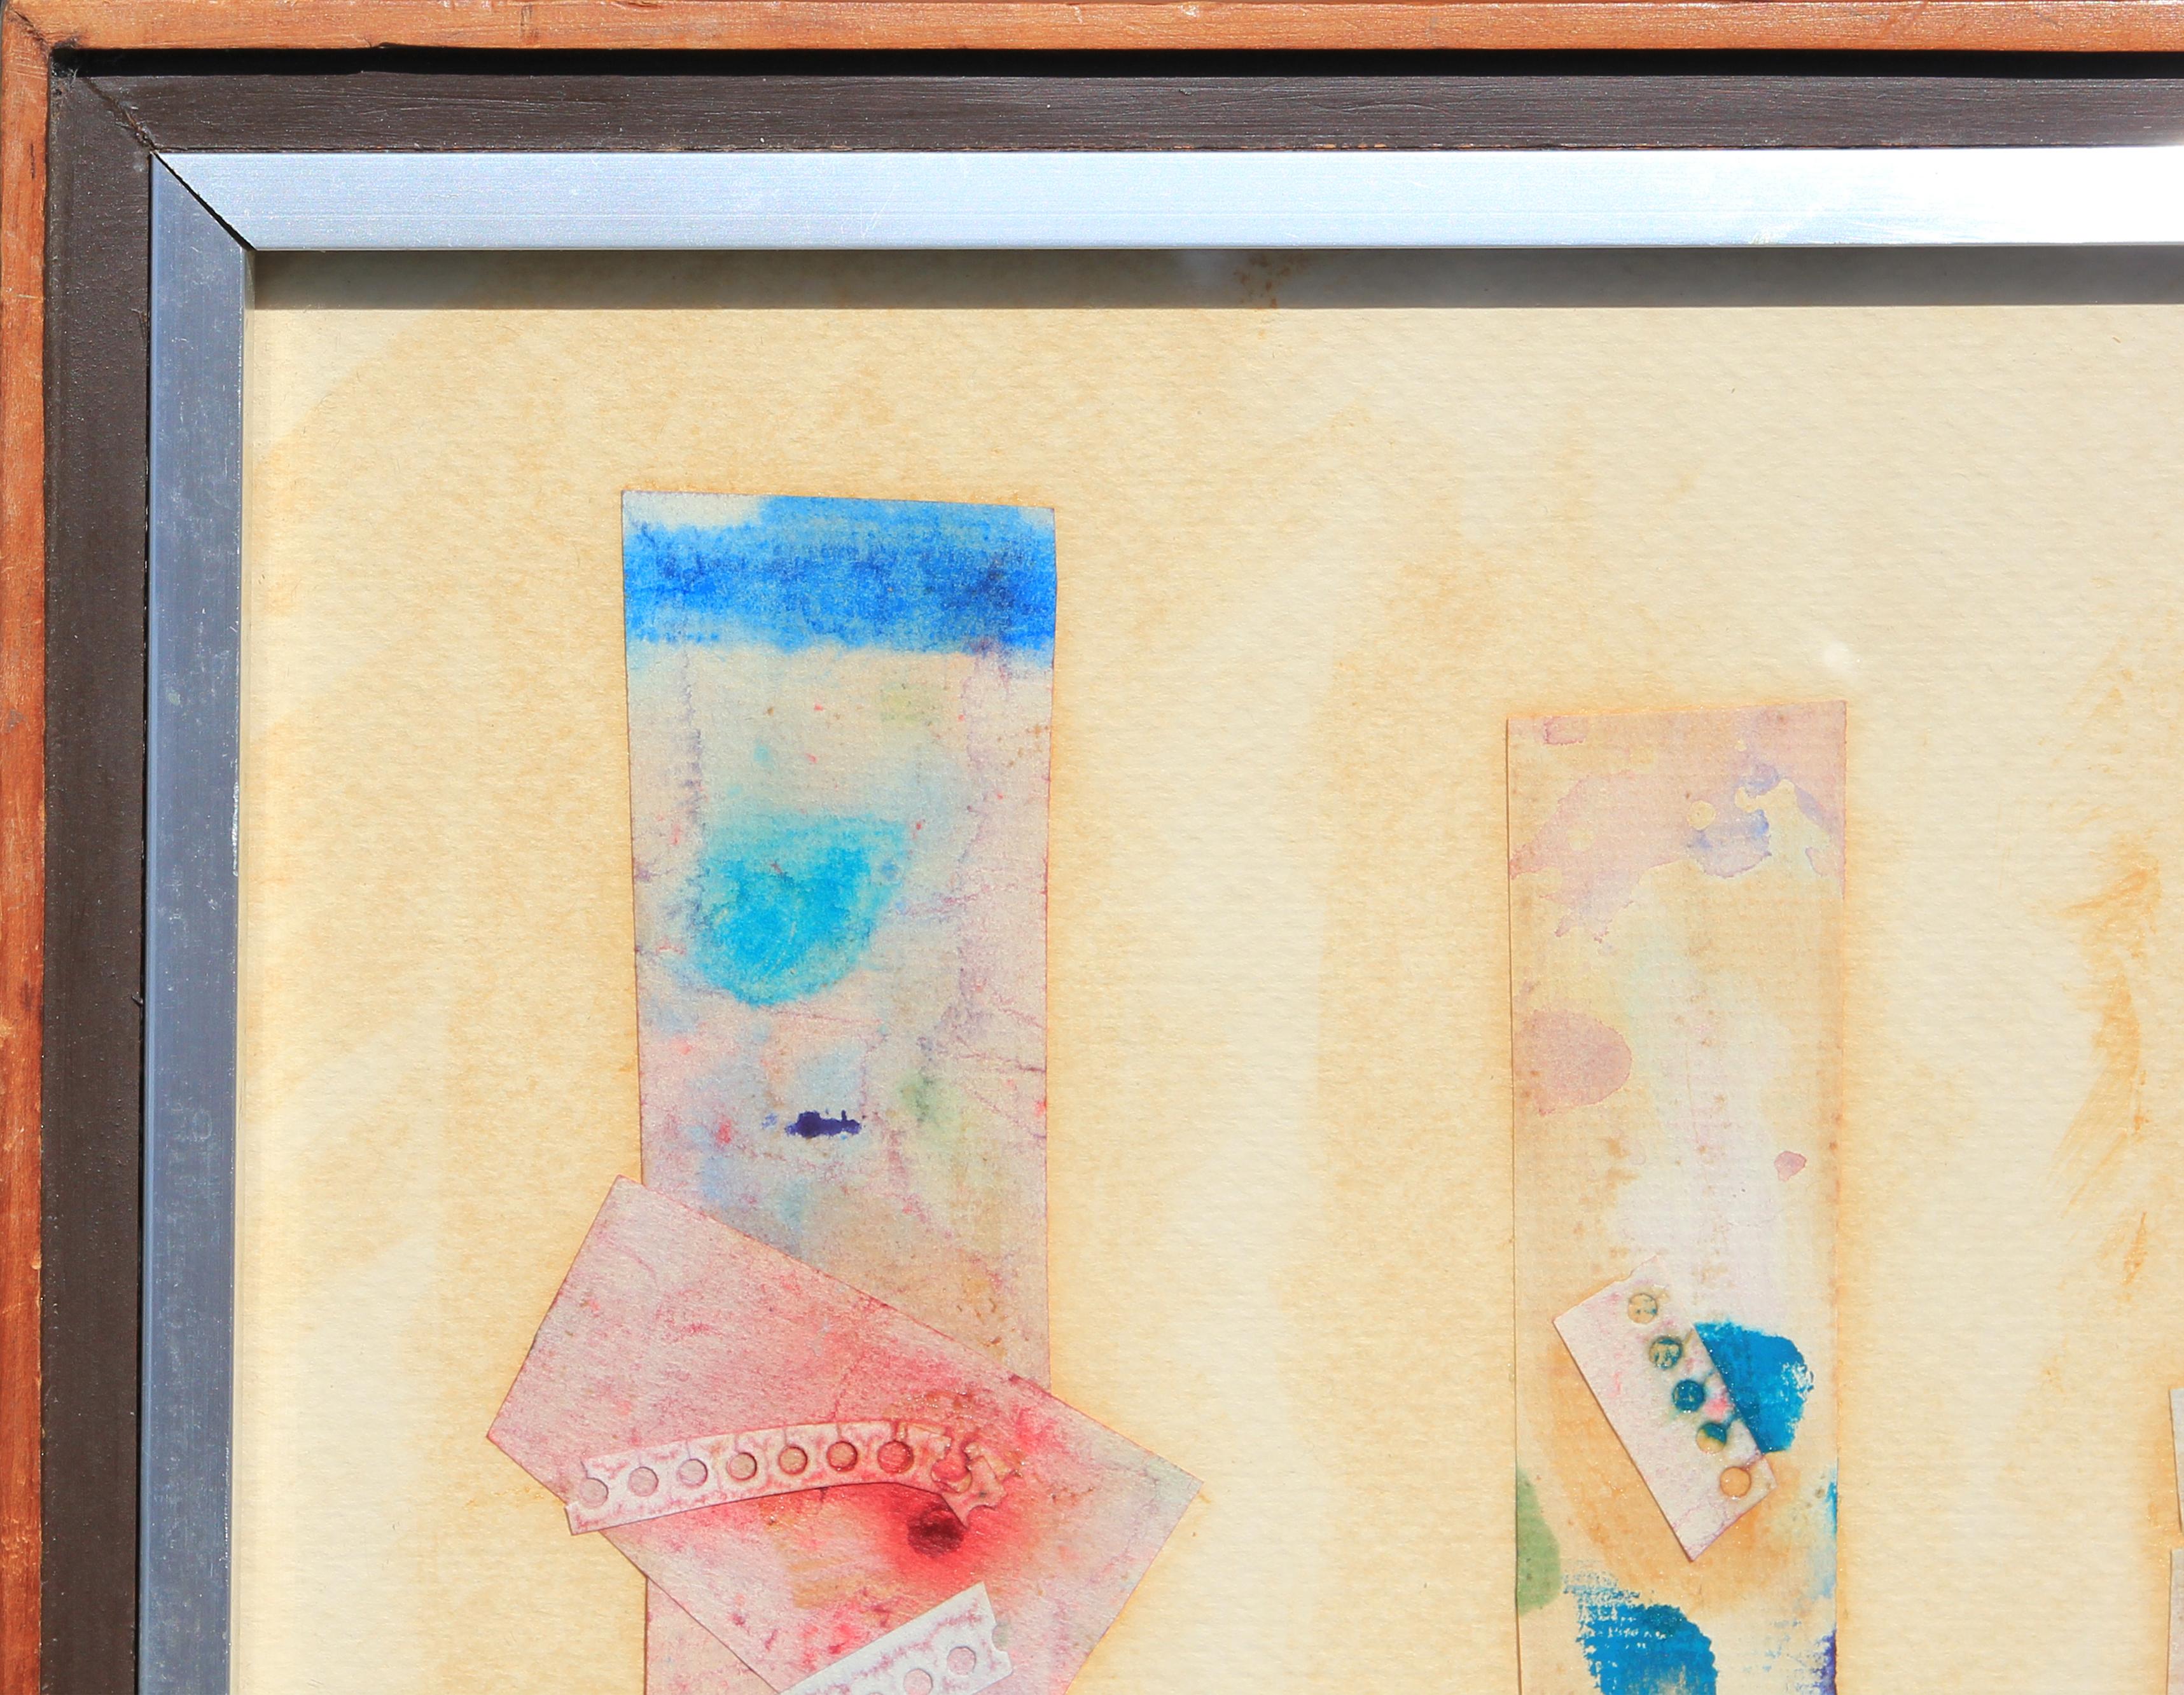 Small Pastel Watercolor Collage - Abstract Mixed Media Art by Ida Rittenberg Kohlmeyer